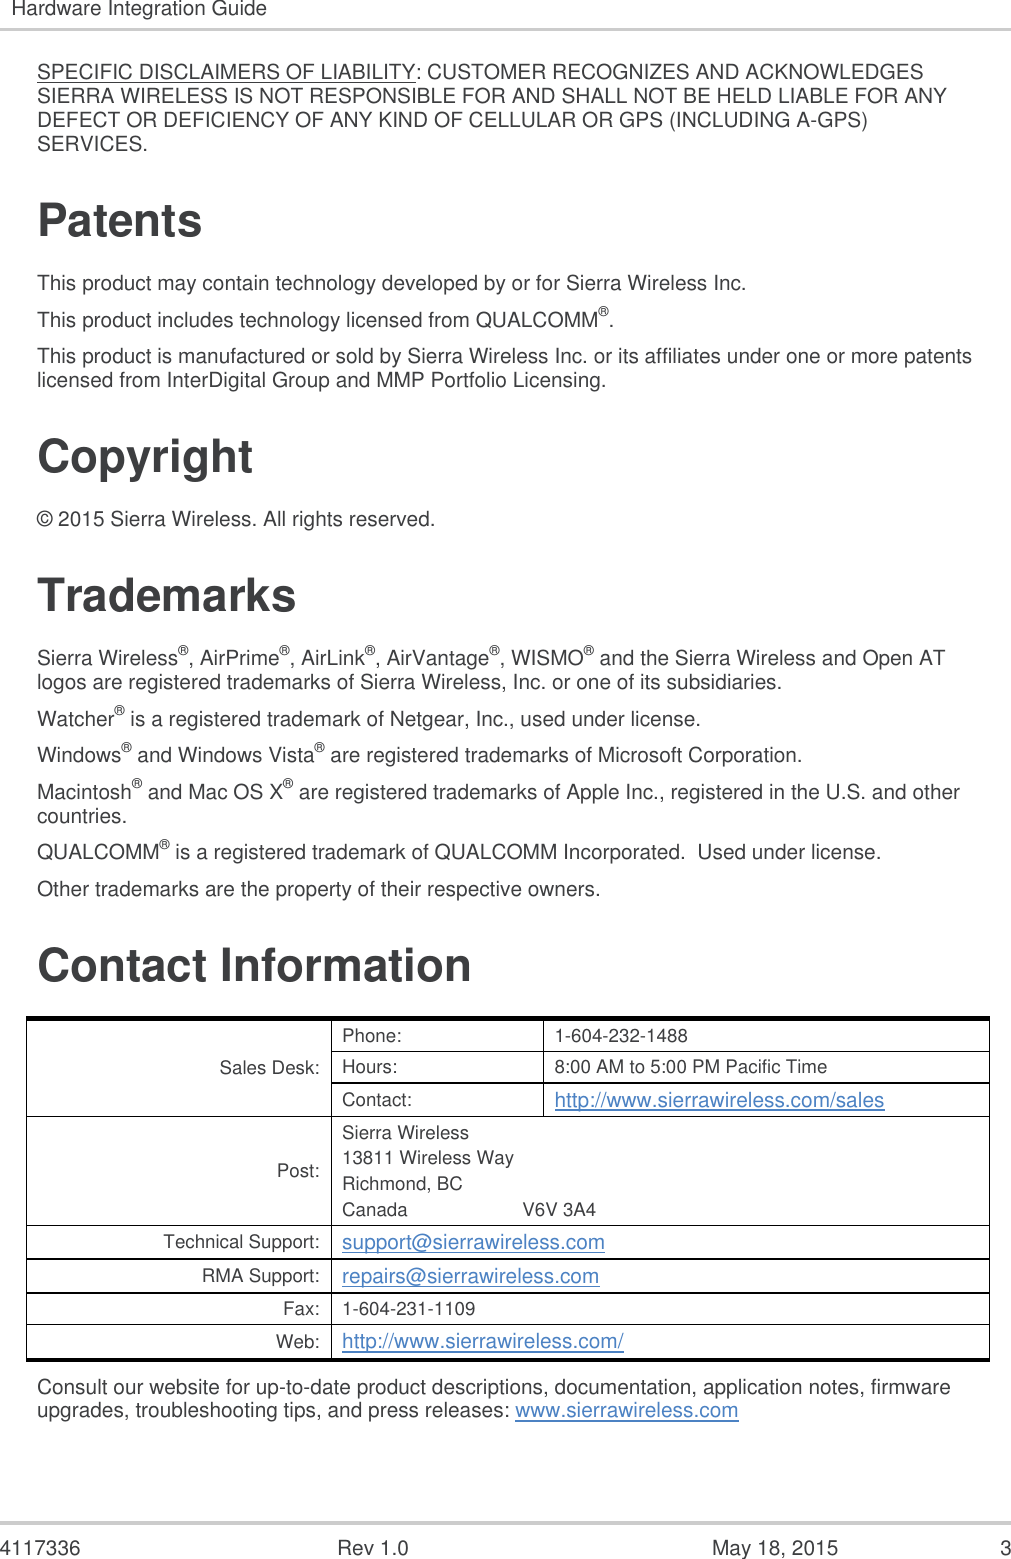   4117336  Rev 1.0  May 18, 2015  3 Hardware Integration Guide  SPECIFIC DISCLAIMERS OF LIABILITY: CUSTOMER RECOGNIZES AND ACKNOWLEDGES SIERRA WIRELESS IS NOT RESPONSIBLE FOR AND SHALL NOT BE HELD LIABLE FOR ANY DEFECT OR DEFICIENCY OF ANY KIND OF CELLULAR OR GPS (INCLUDING A-GPS) SERVICES. Patents This product may contain technology developed by or for Sierra Wireless Inc. This product includes technology licensed from QUALCOMM®. This product is manufactured or sold by Sierra Wireless Inc. or its affiliates under one or more patents licensed from InterDigital Group and MMP Portfolio Licensing. Copyright © 2015 Sierra Wireless. All rights reserved. Trademarks Sierra Wireless®, AirPrime®, AirLink®, AirVantage®, WISMO® and the Sierra Wireless and Open AT logos are registered trademarks of Sierra Wireless, Inc. or one of its subsidiaries. Watcher® is a registered trademark of Netgear, Inc., used under license. Windows® and Windows Vista® are registered trademarks of Microsoft Corporation. Macintosh® and Mac OS X® are registered trademarks of Apple Inc., registered in the U.S. and other countries. QUALCOMM® is a registered trademark of QUALCOMM Incorporated.  Used under license. Other trademarks are the property of their respective owners. Contact Information Sales Desk: Phone: 1-604-232-1488 Hours: 8:00 AM to 5:00 PM Pacific Time Contact: http://www.sierrawireless.com/sales Post: Sierra Wireless 13811 Wireless Way Richmond, BC Canada                      V6V 3A4 Technical Support: support@sierrawireless.com RMA Support: repairs@sierrawireless.com Fax: 1-604-231-1109 Web: http://www.sierrawireless.com/ Consult our website for up-to-date product descriptions, documentation, application notes, firmware upgrades, troubleshooting tips, and press releases: www.sierrawireless.com 